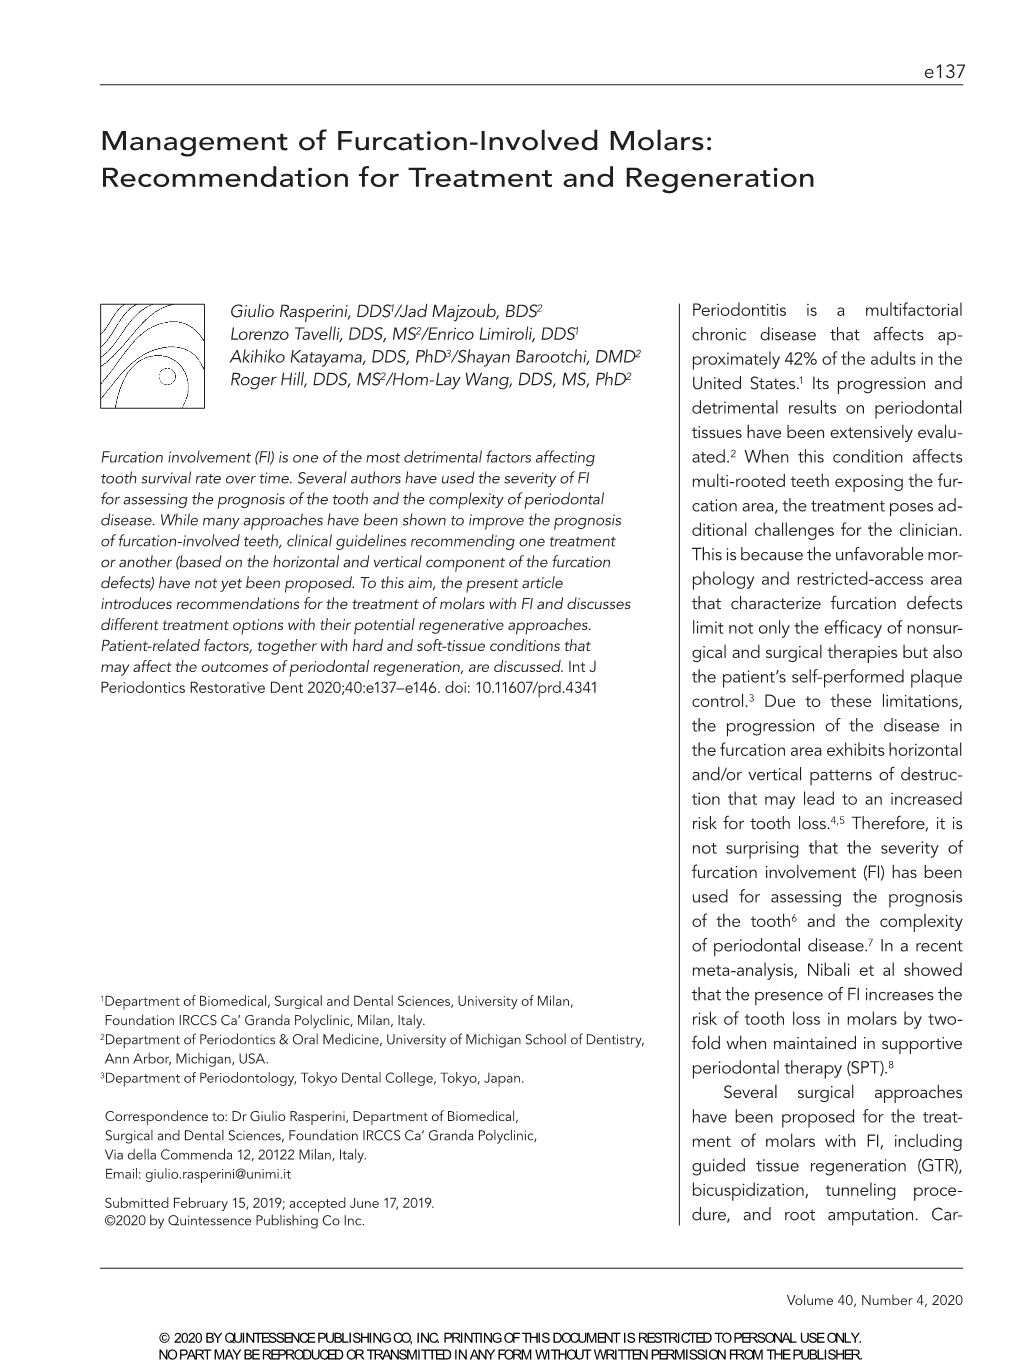 Management of Furcation-Involved Molars: Recommendation for Treatment and Regeneration